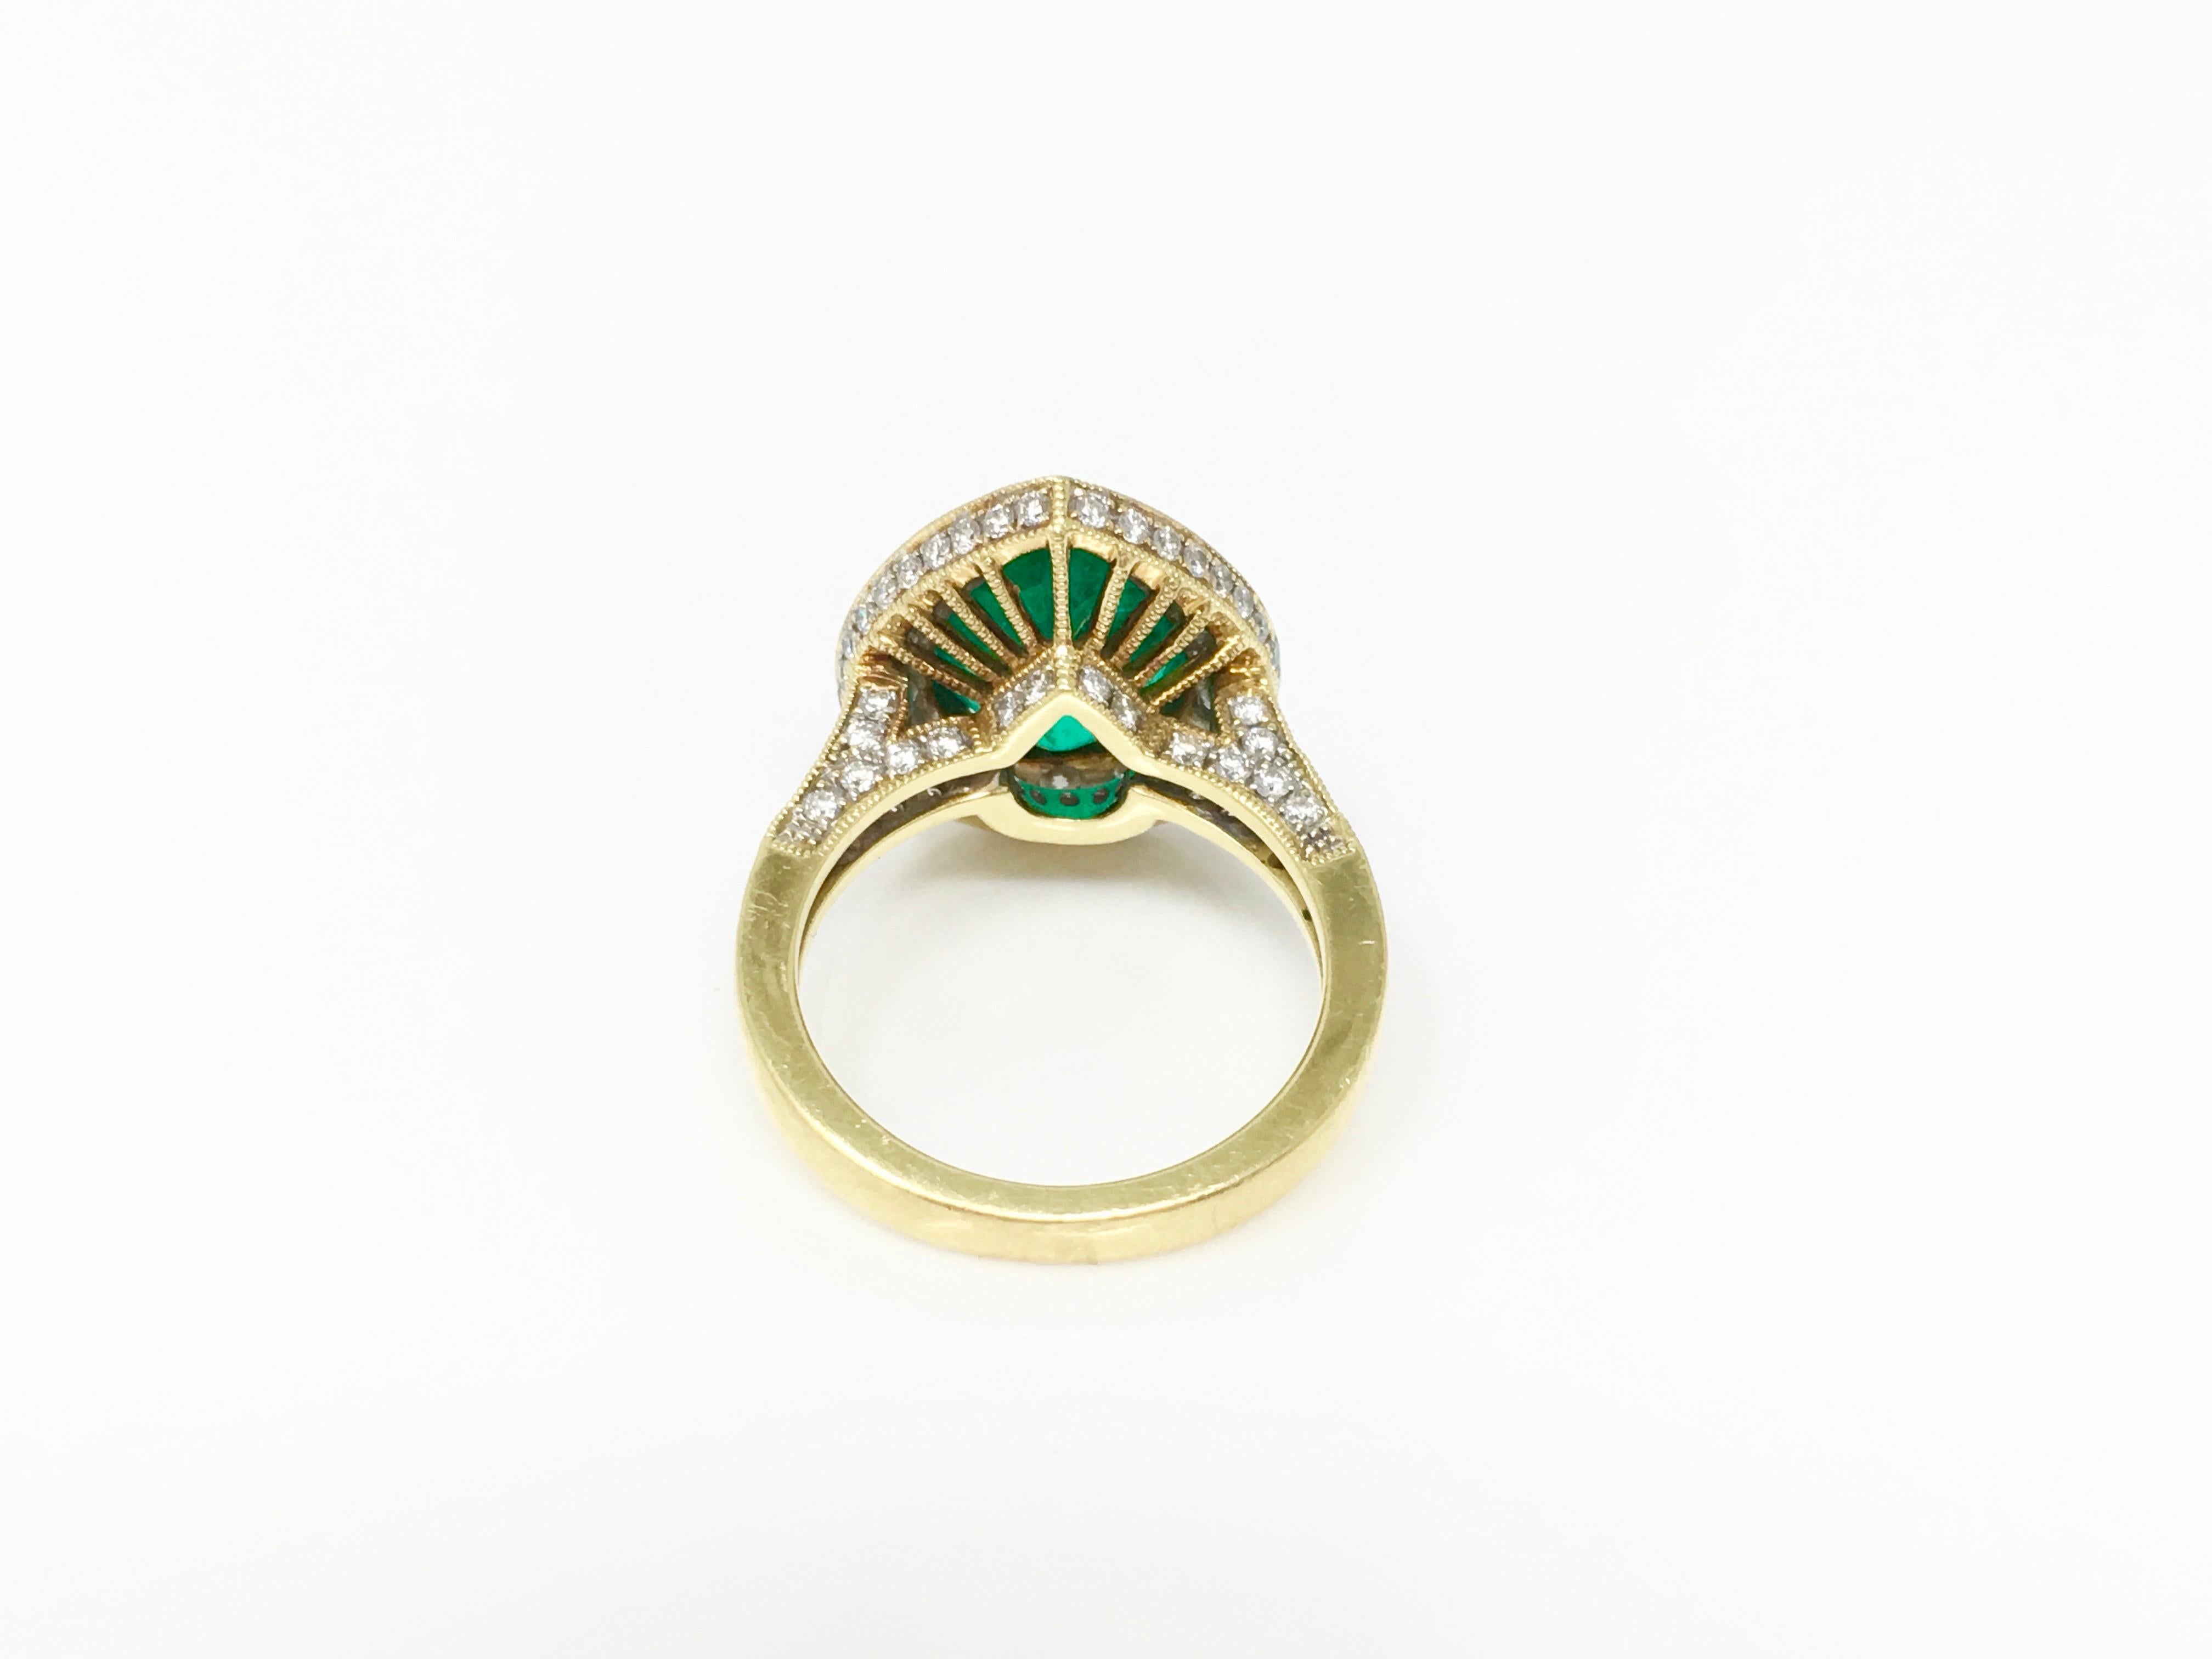 3.25 Carat Emerald and Diamond Engagement Ring in 18K Yellow Gold 4